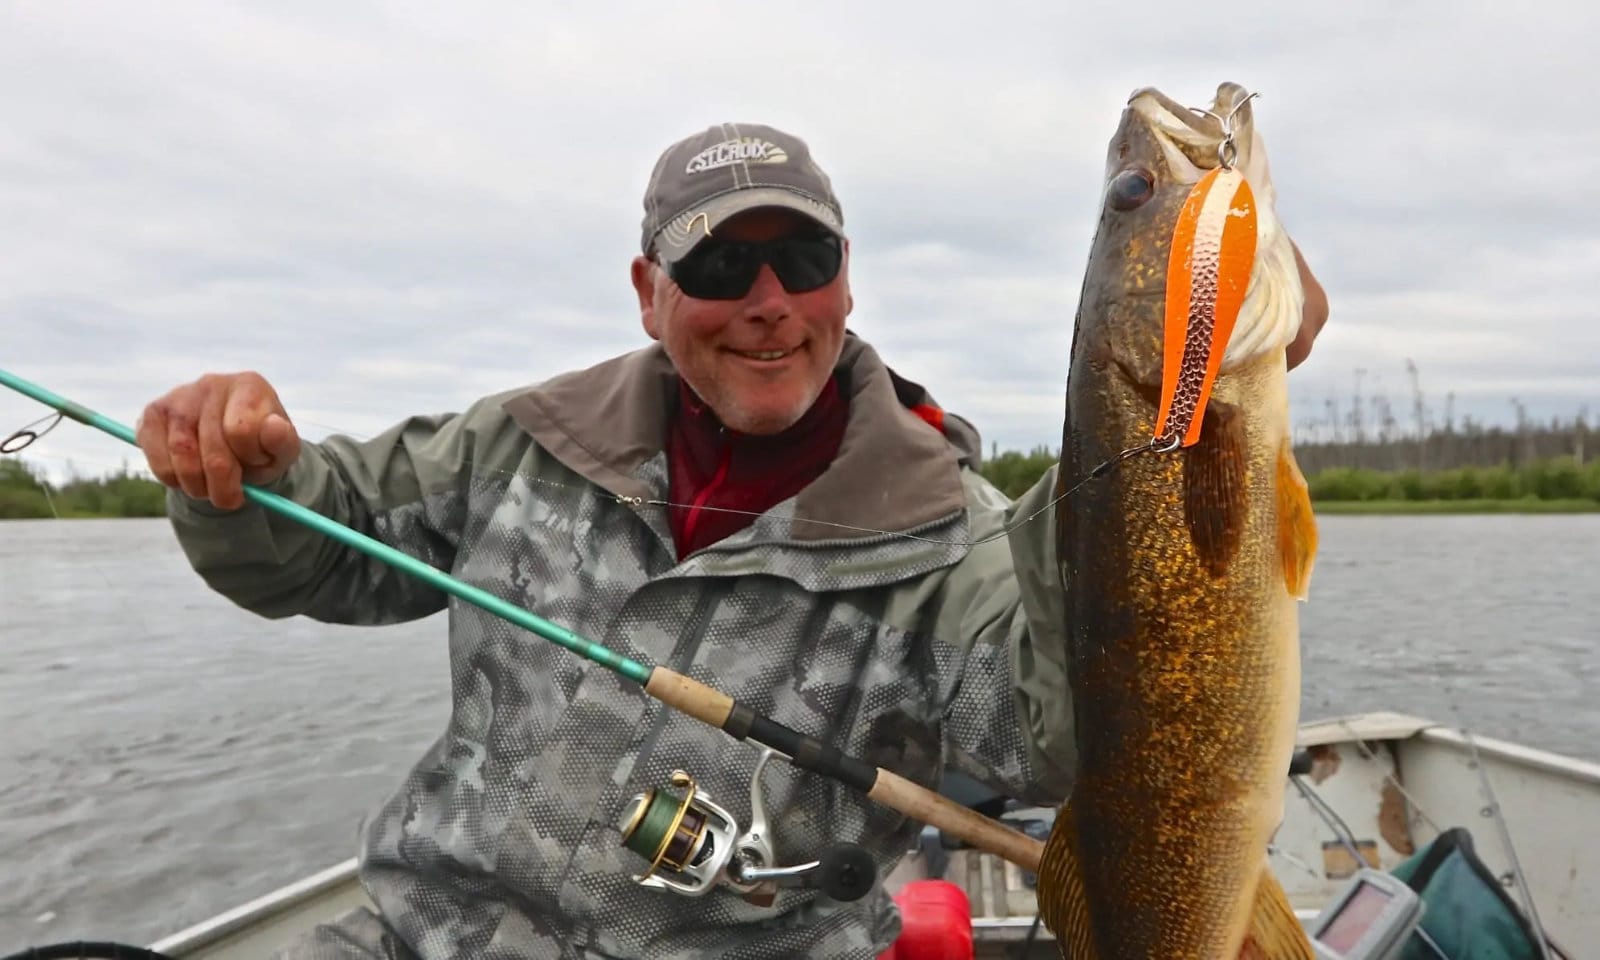 https://www.yellowbirdproducts.com/wp-content/uploads/2020/03/Tips-for-Picking-the-Gear-Spoon-Fishing-for-Walleye.jpg